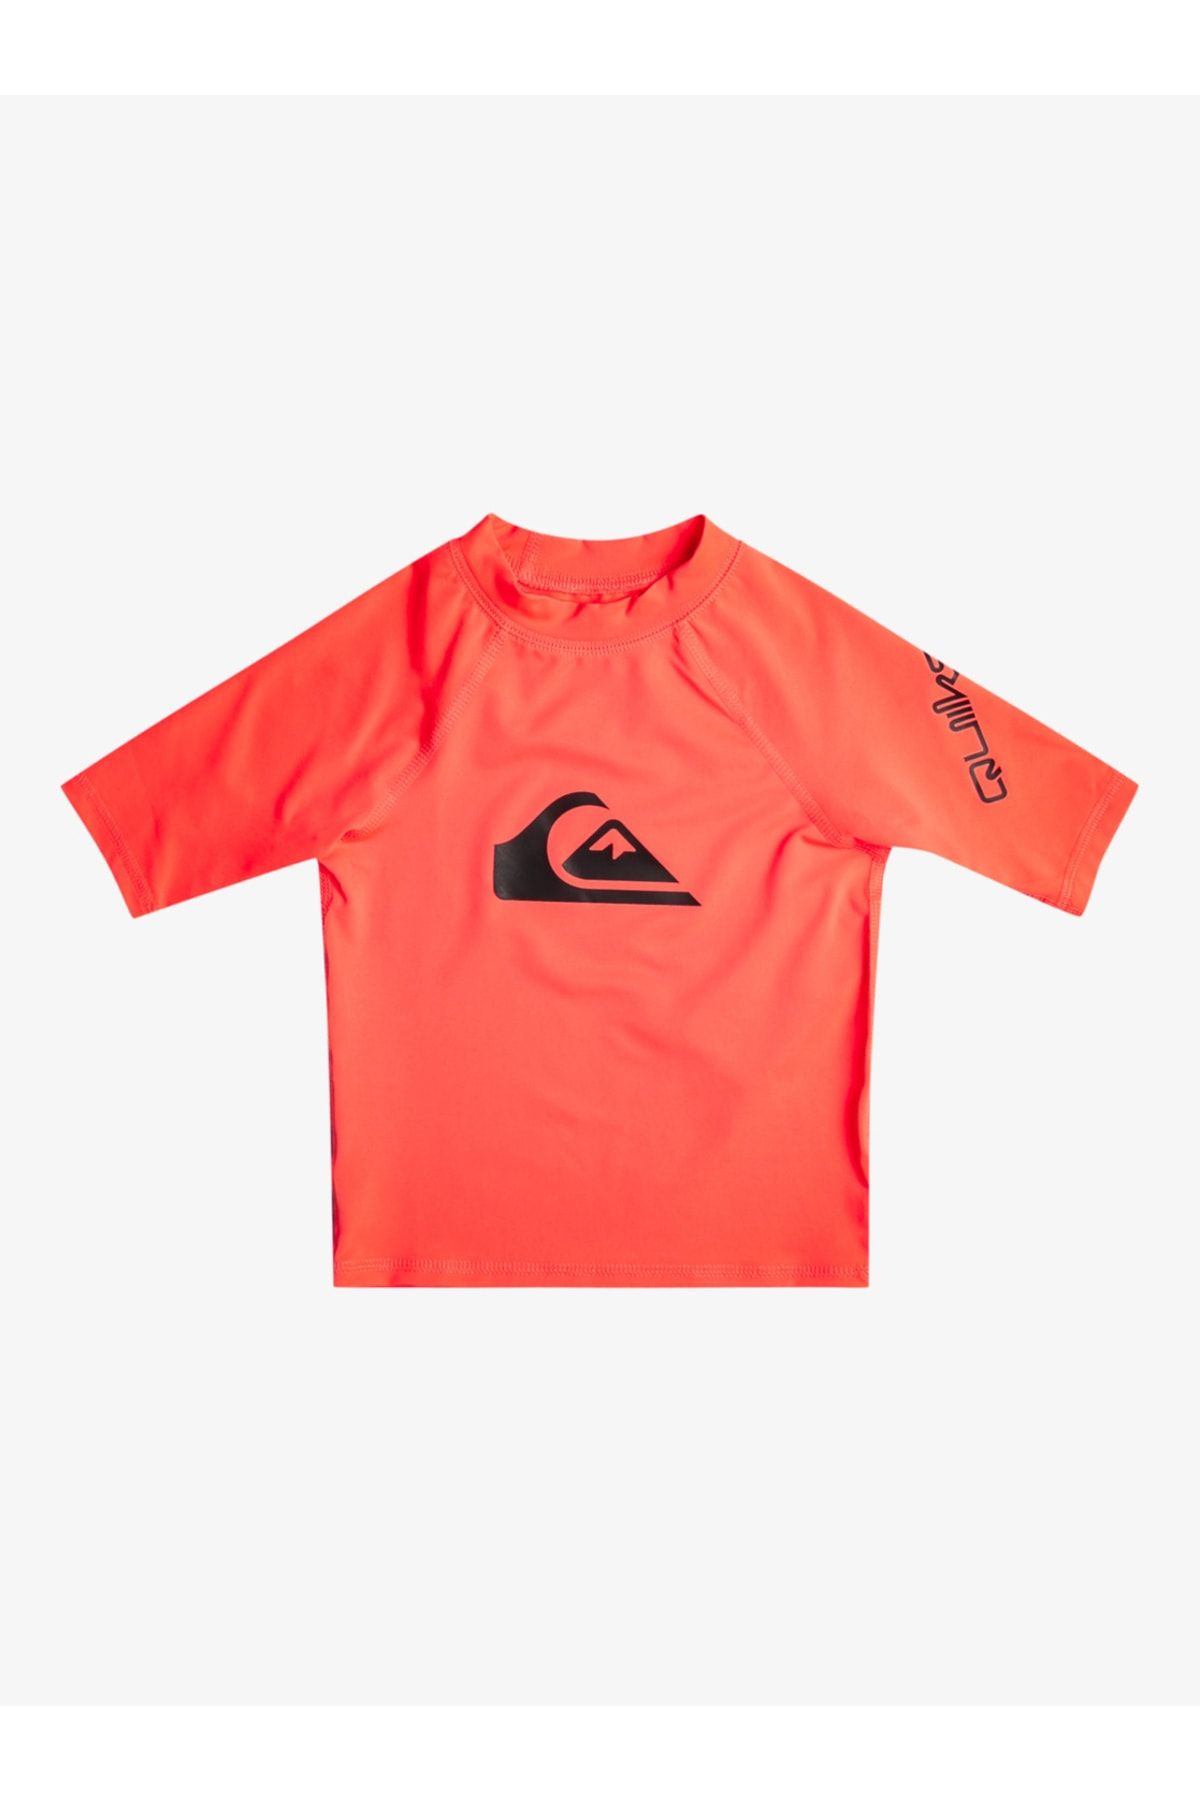 Quiksilver All Time